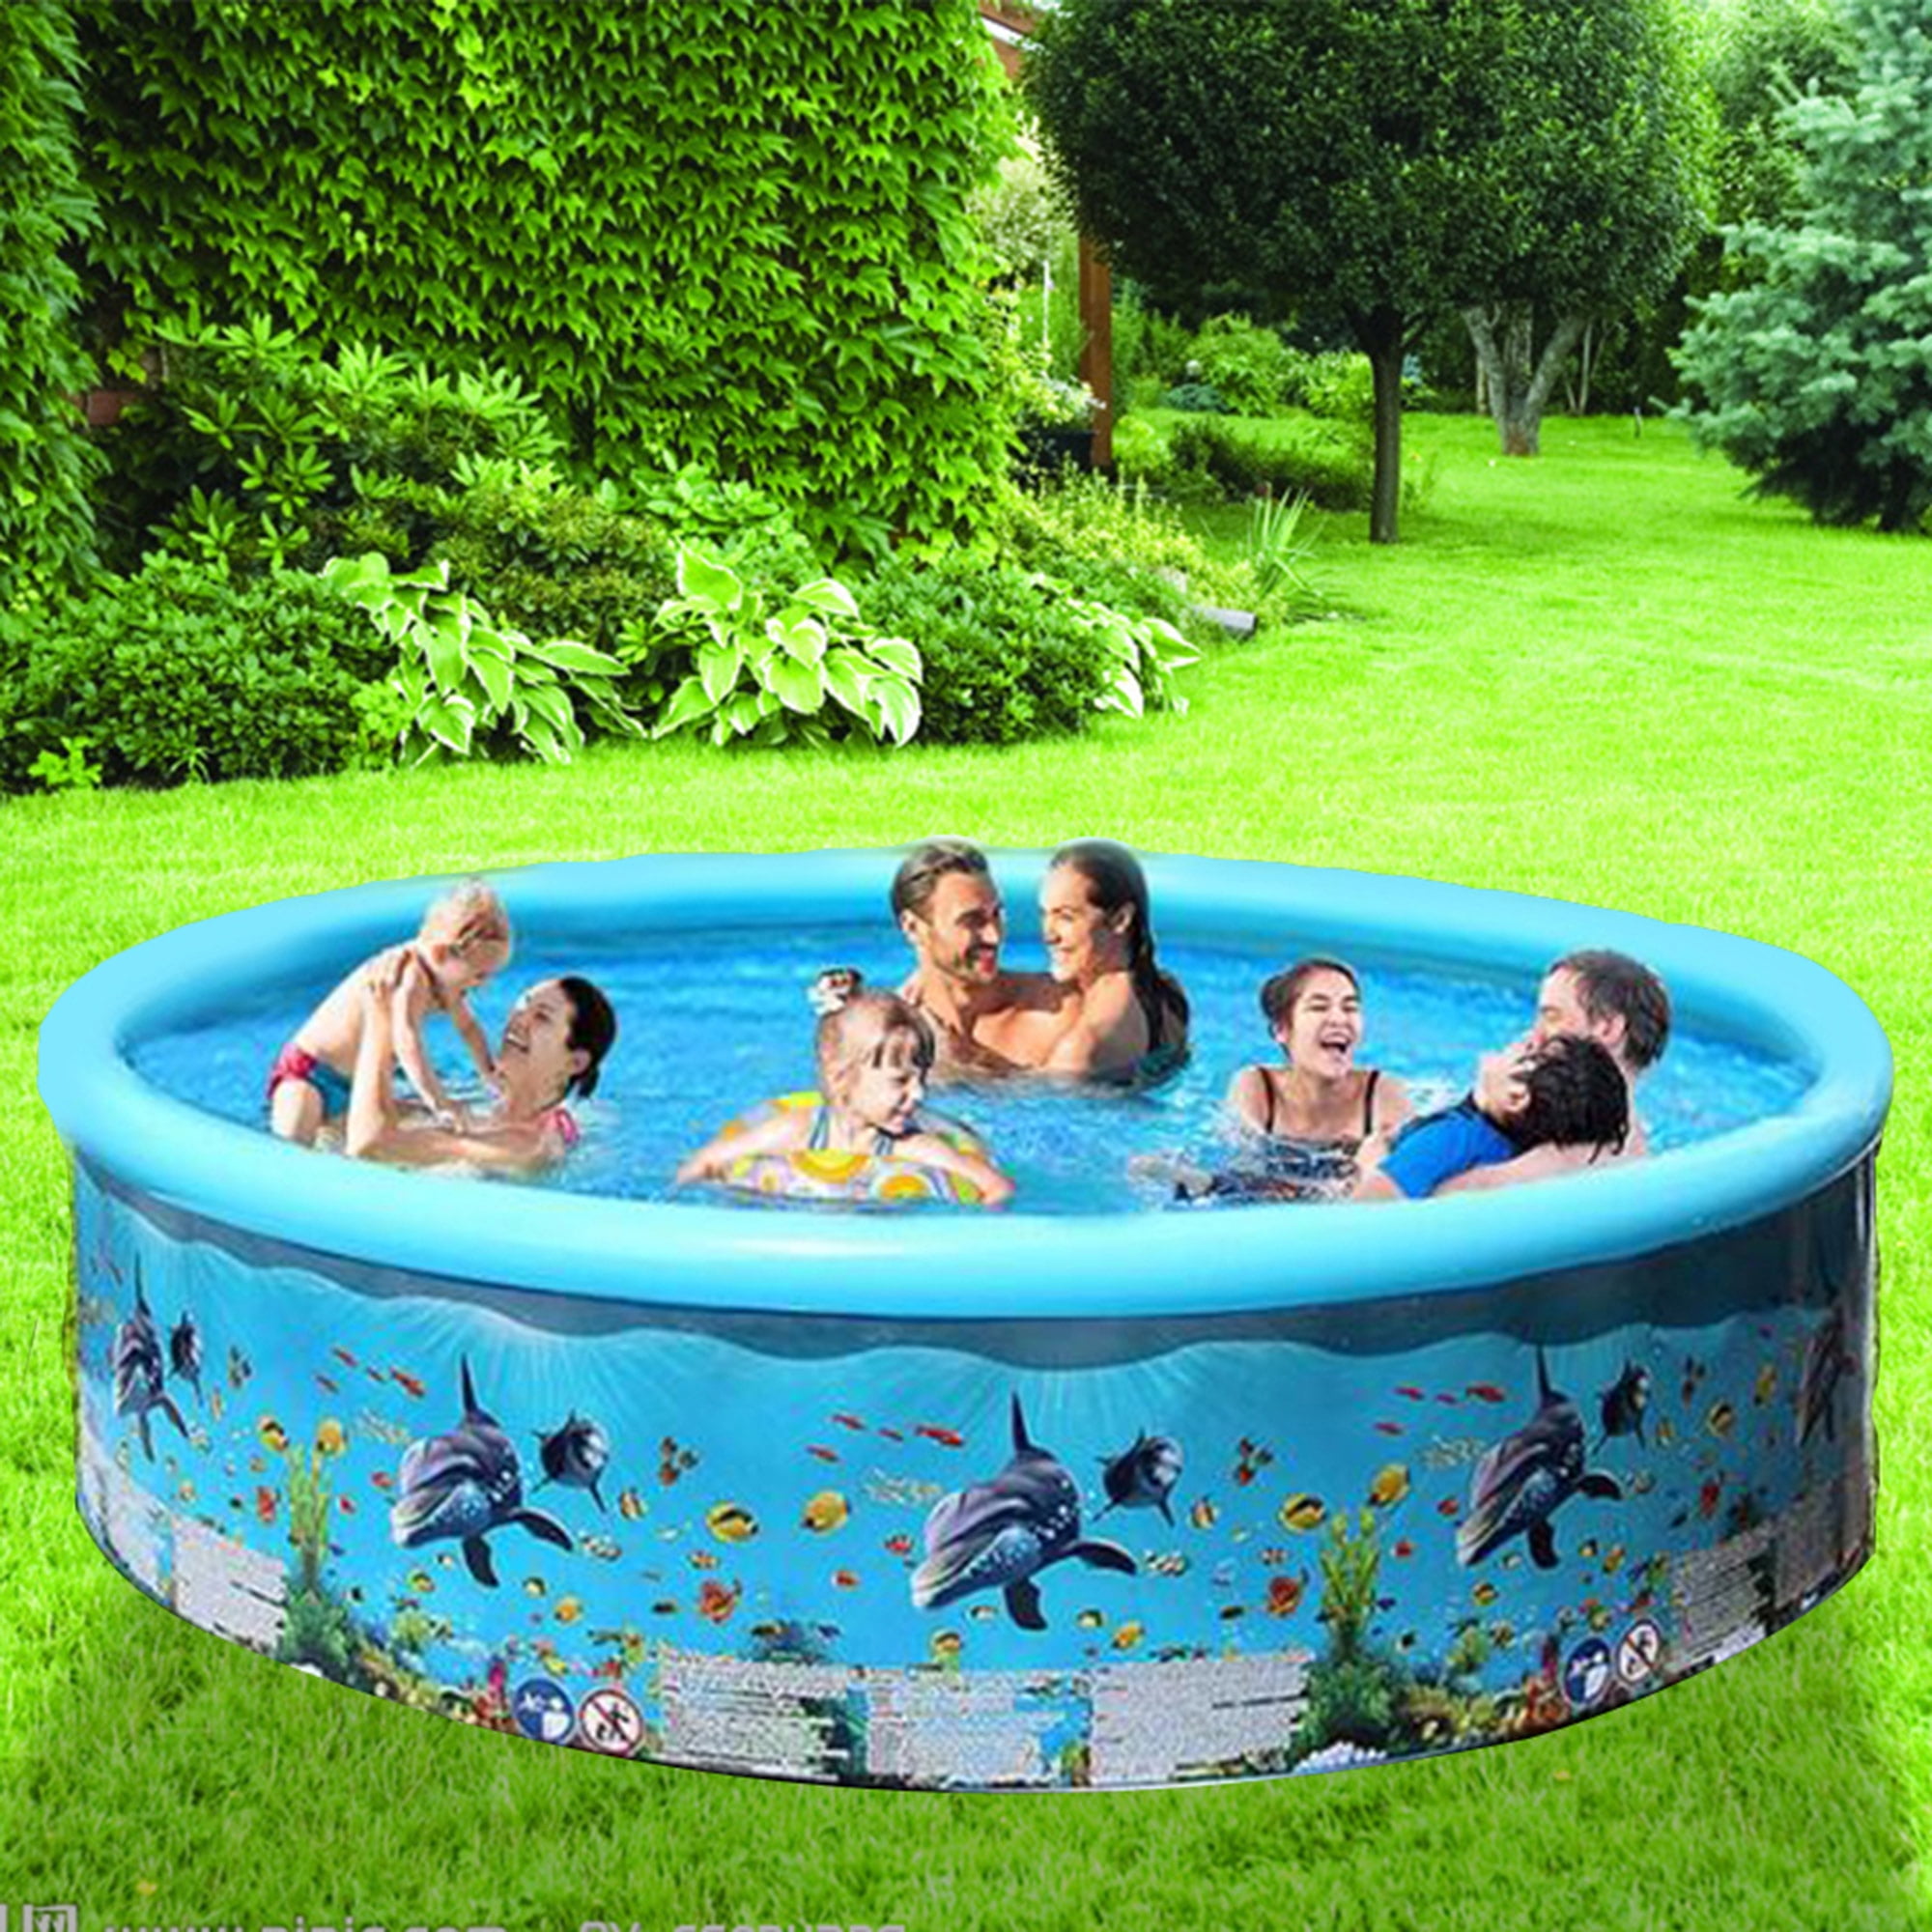 Childrens Inflatable Pool 48x10 Kids Swimming Pools Outdoor Water Fun Play Blue 